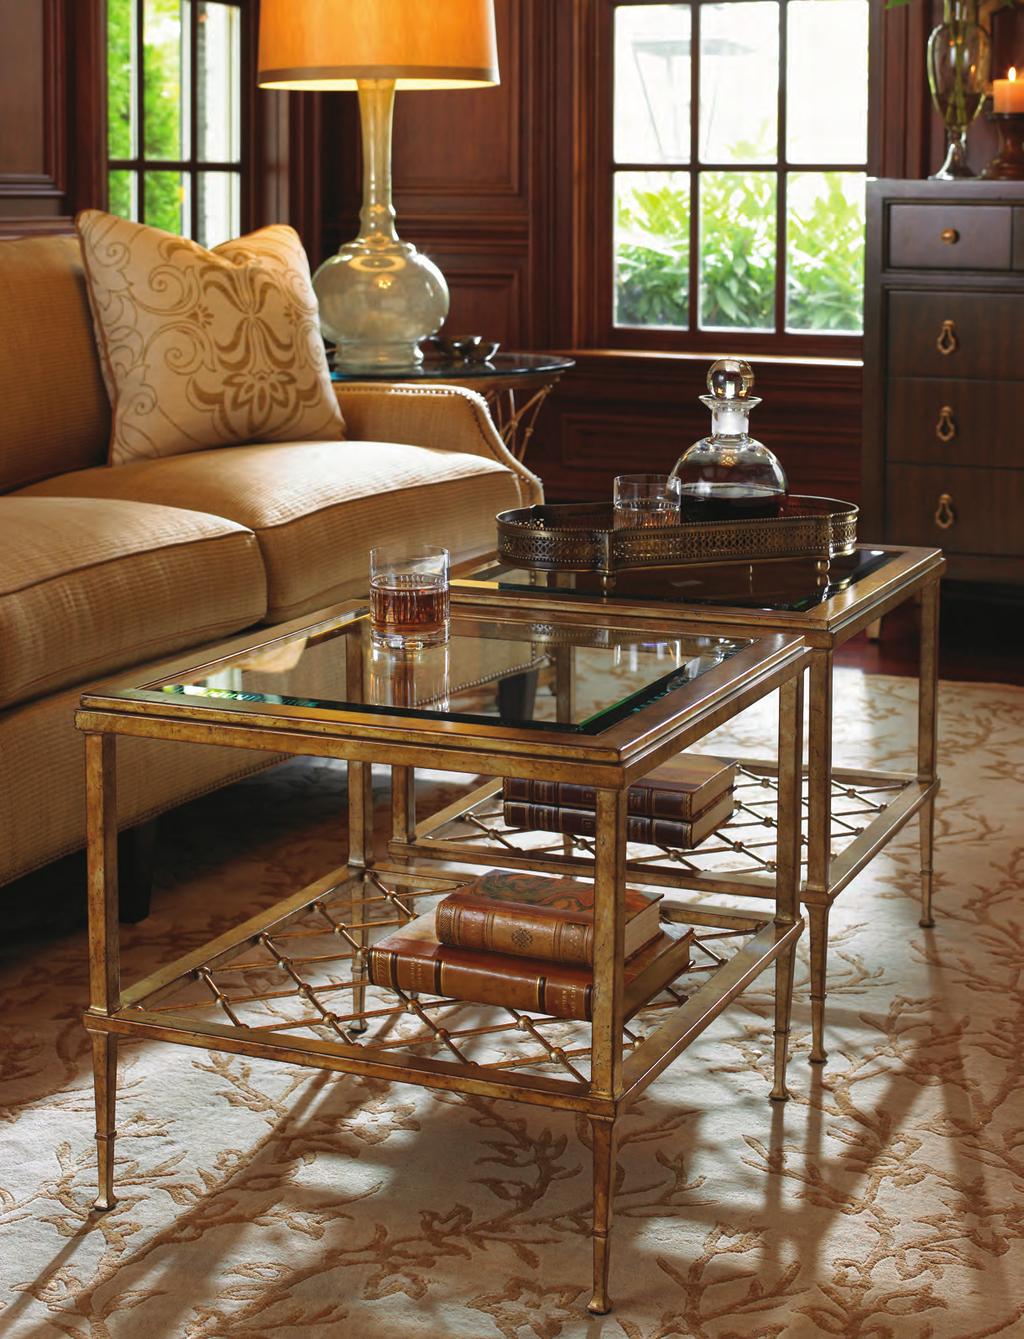 The 22-inch square Sanremo Cocktail Table offers beauty and flexibility.